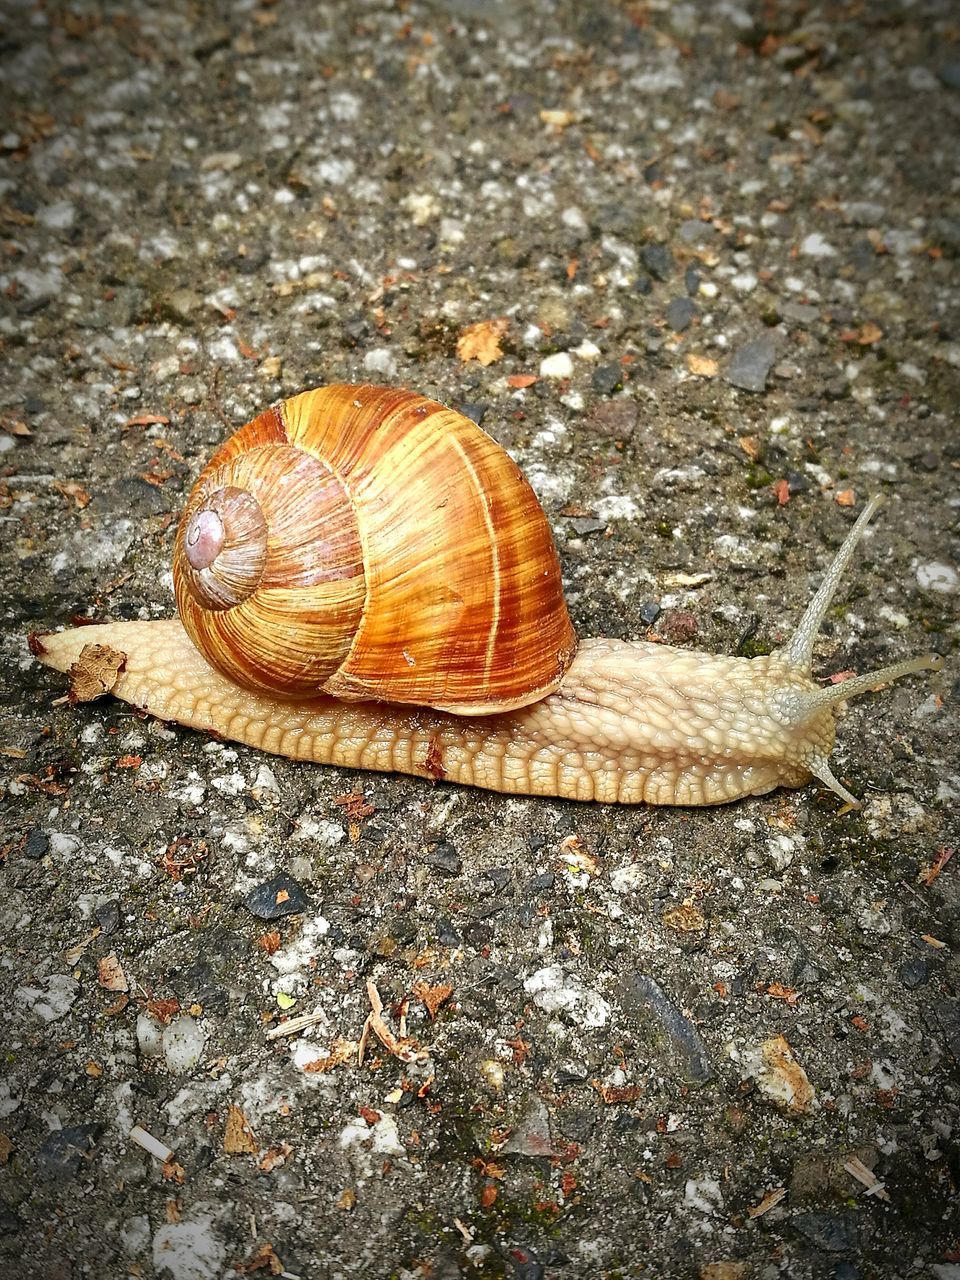 animal themes, snail, one animal, close-up, animal shell, outdoors, surface level, day, zoology, tranquility, no people, footpath